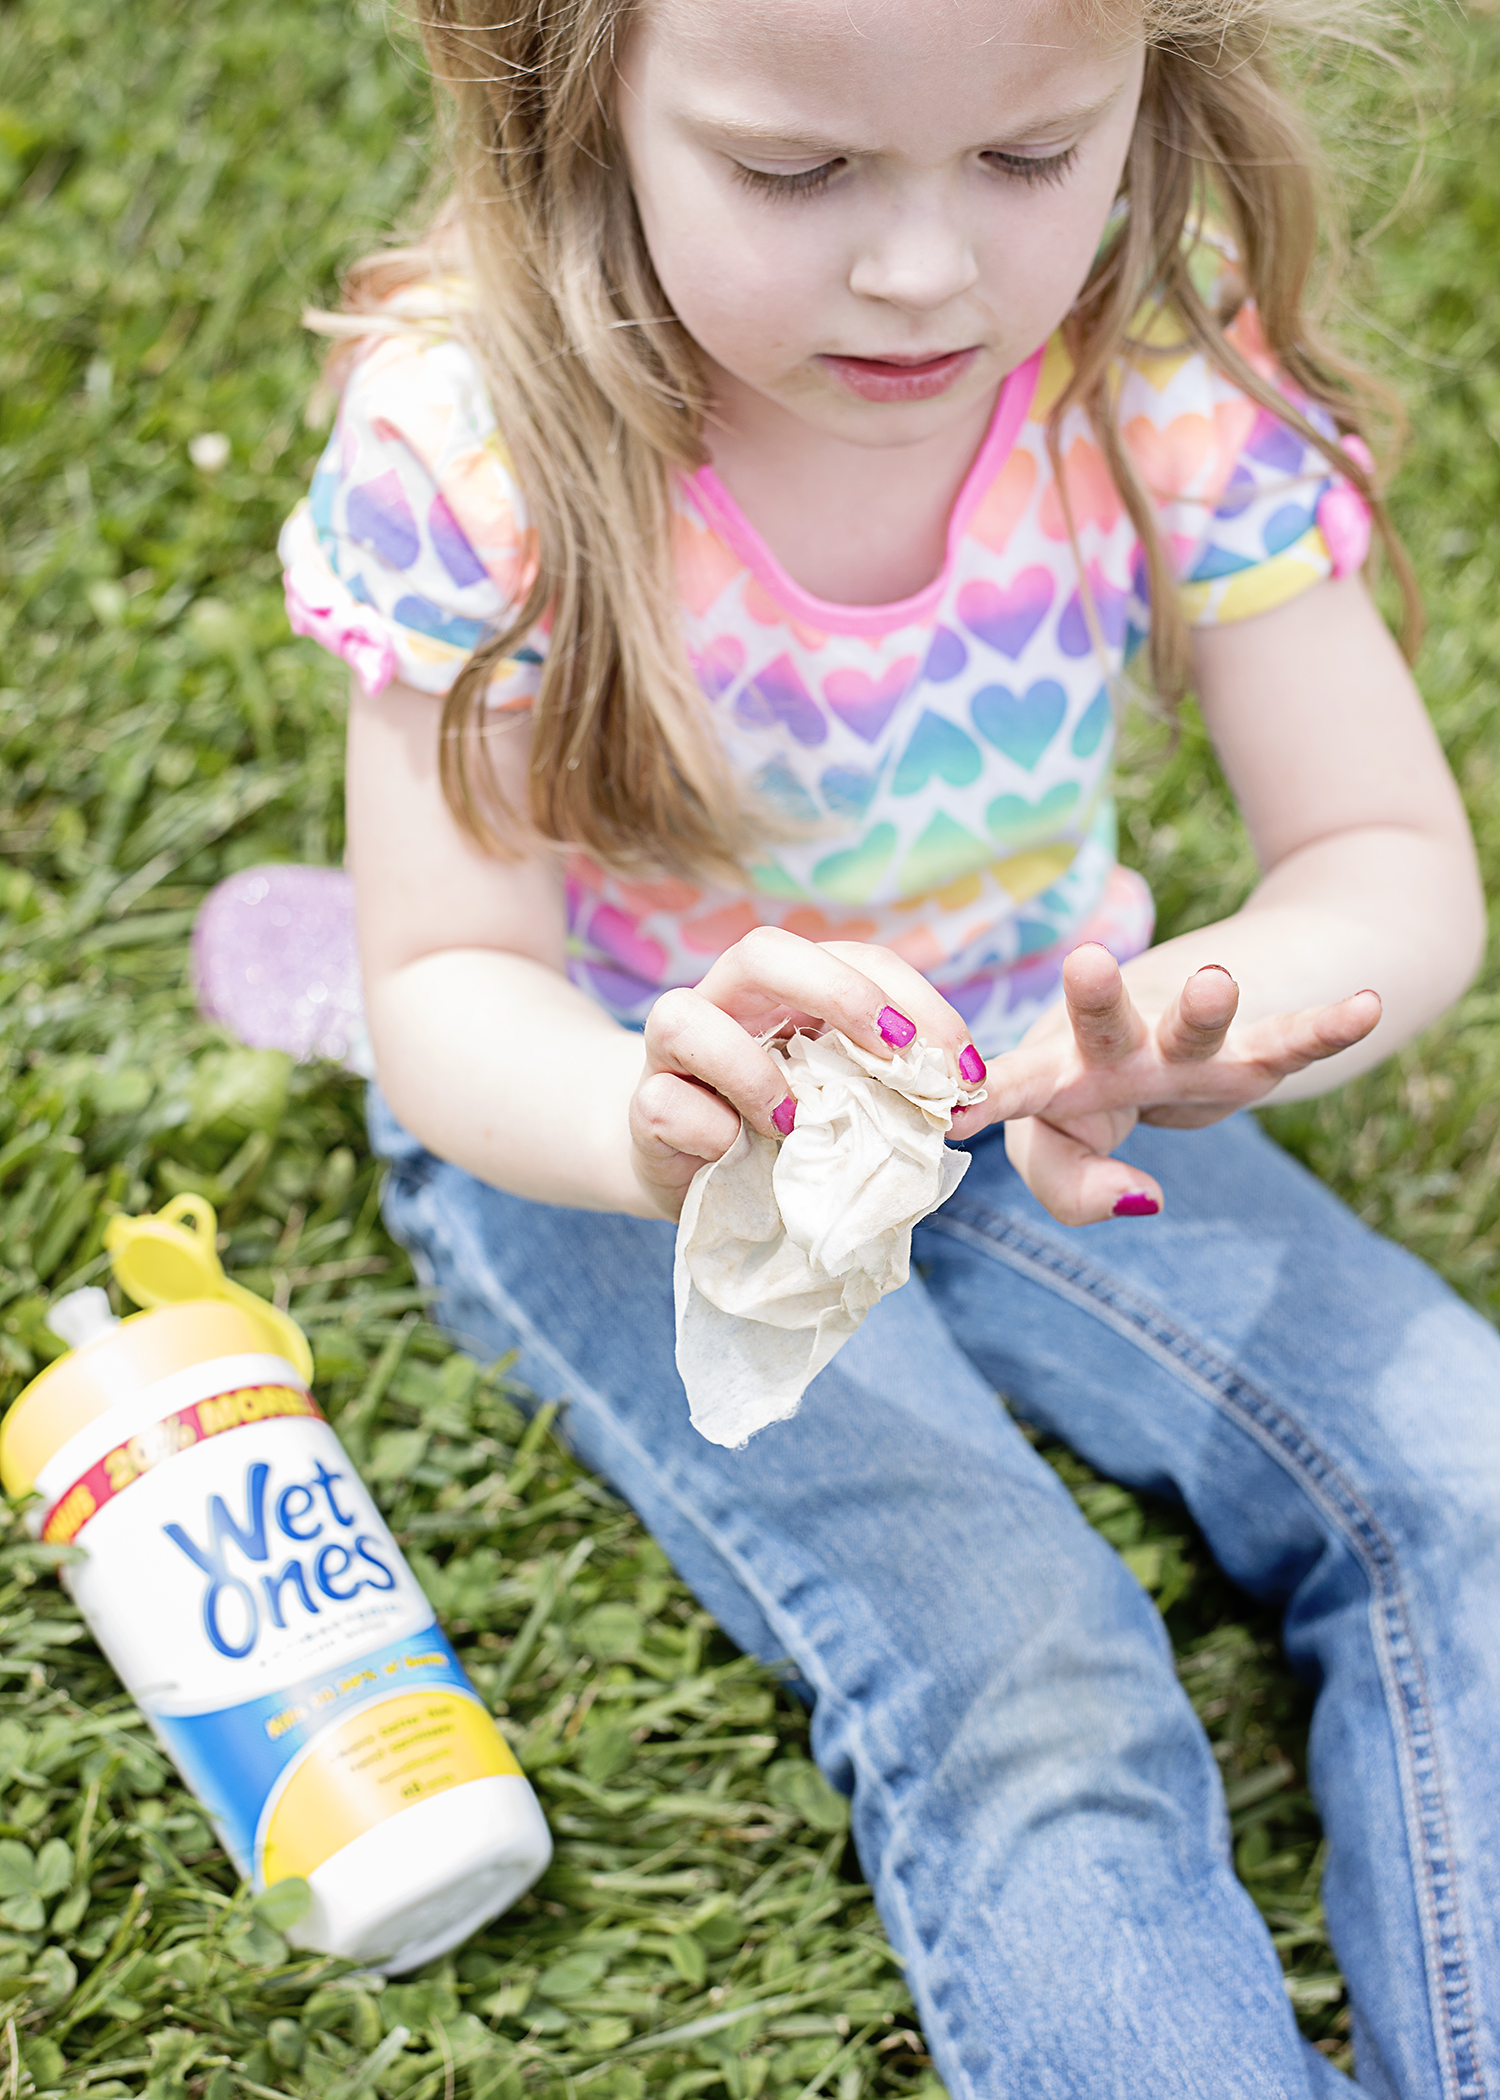 #1 Way to Keep Little Hands Clean at the Park and at Play!